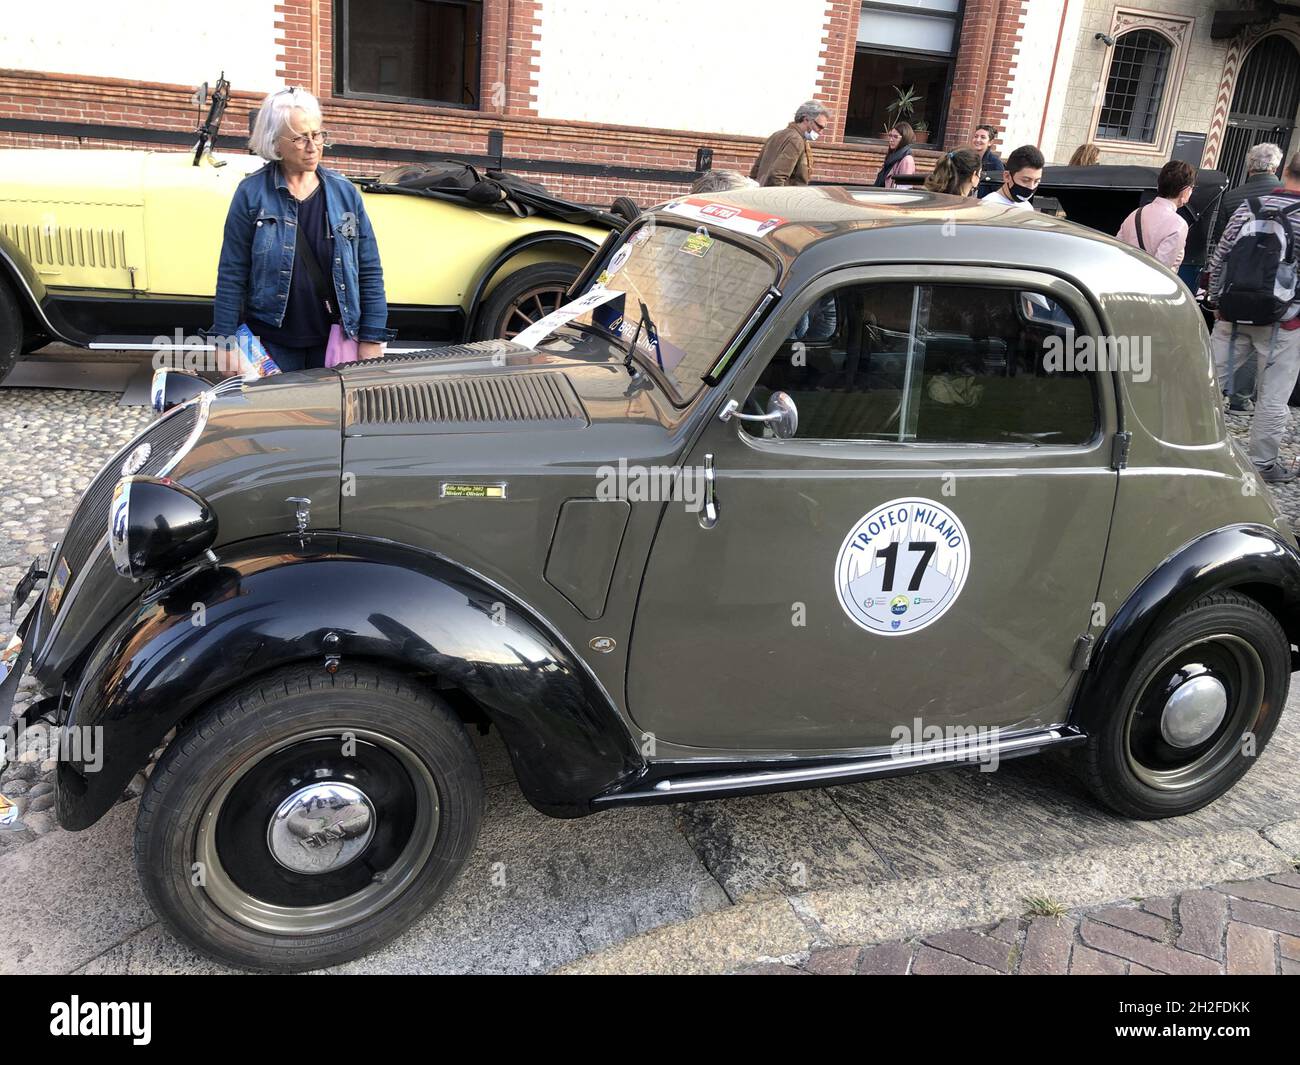 Milano, Italy. 9th Oct, 2021. TROFEO MILANO, a vintage cars and motorcycles competition organized by C.M.A.E., Club Milanese Automotoveicoli d'Epoca. Stock Photo